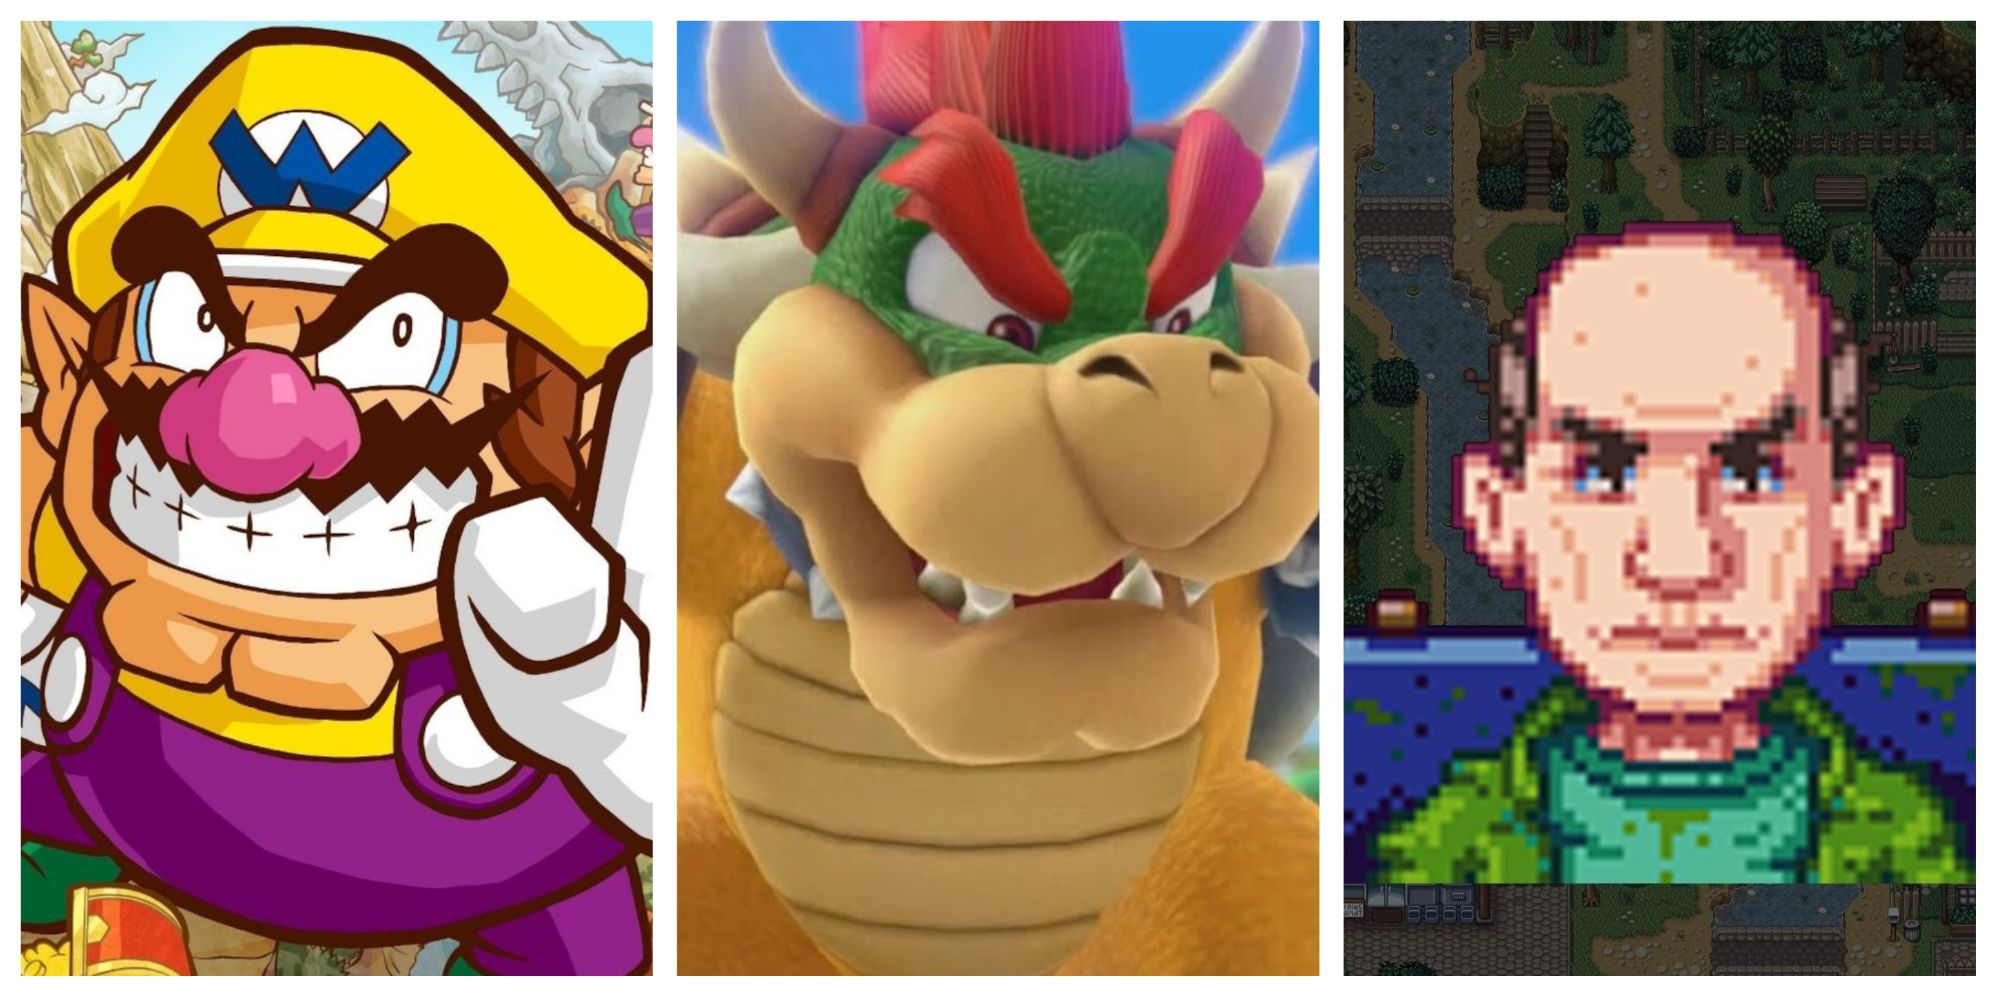 From Left to Right: Wario from Wario Land: Shake It, Bowser from Super Mario Bros., and George from Stardew Valley.